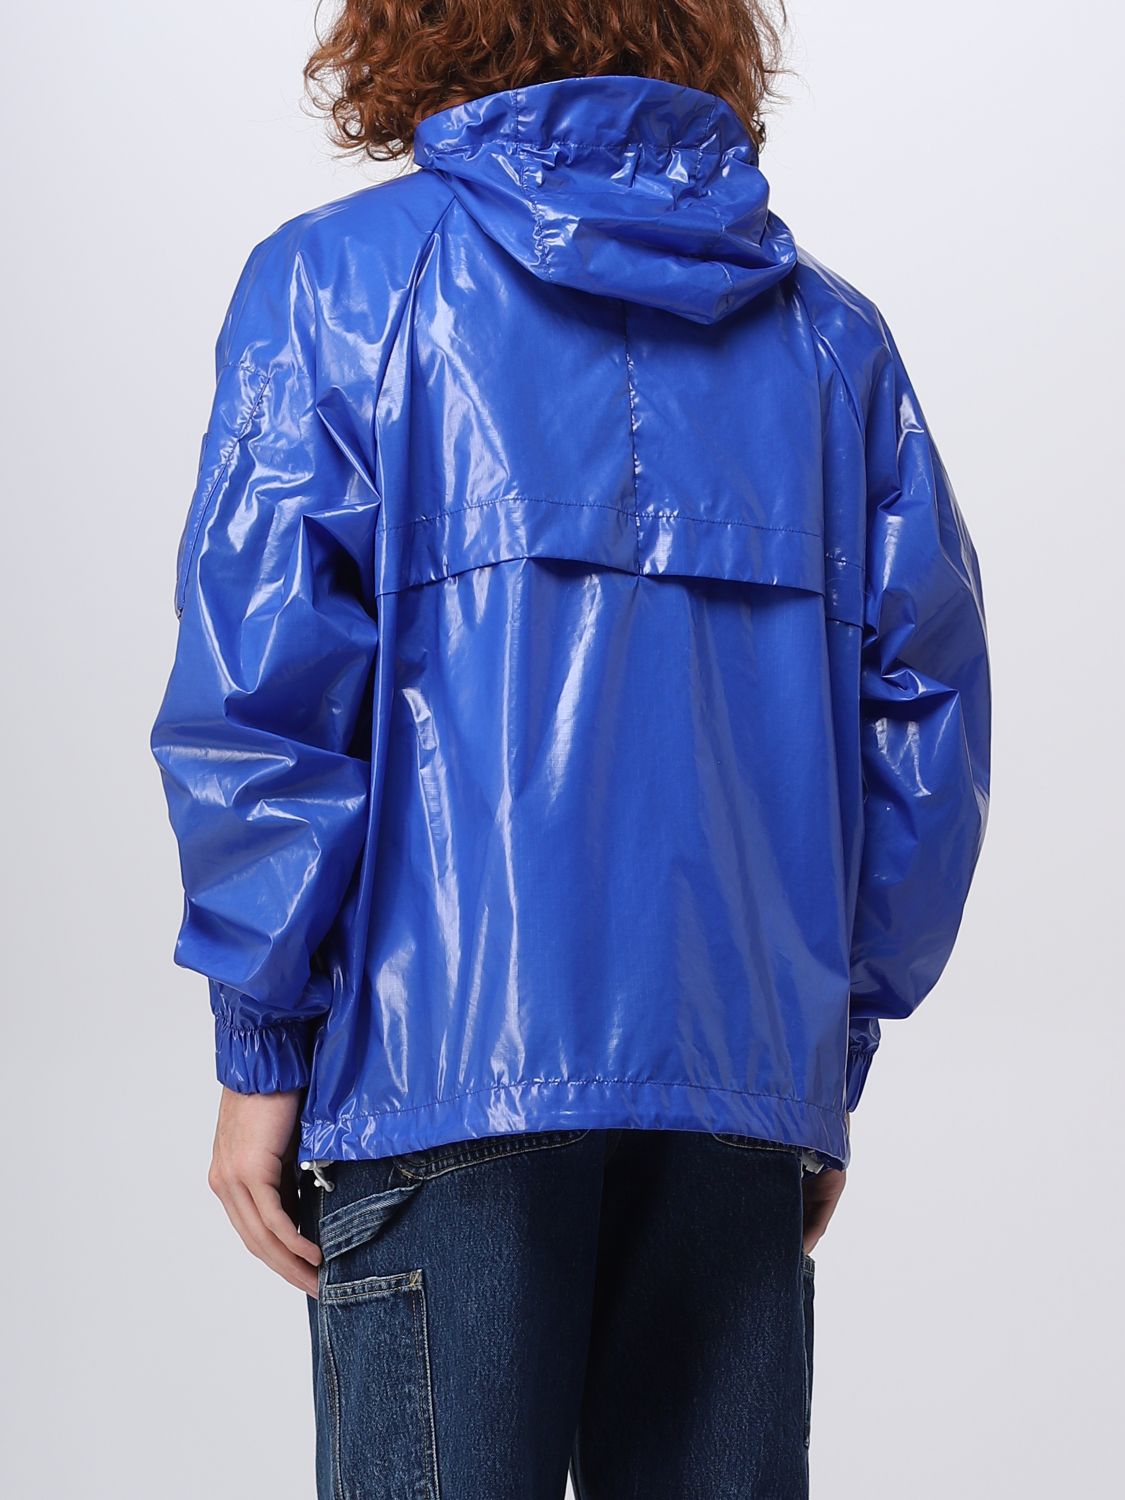 KWAY R&D: jacket for man - Blue | Kway R&D jacket K6117DW online on ...